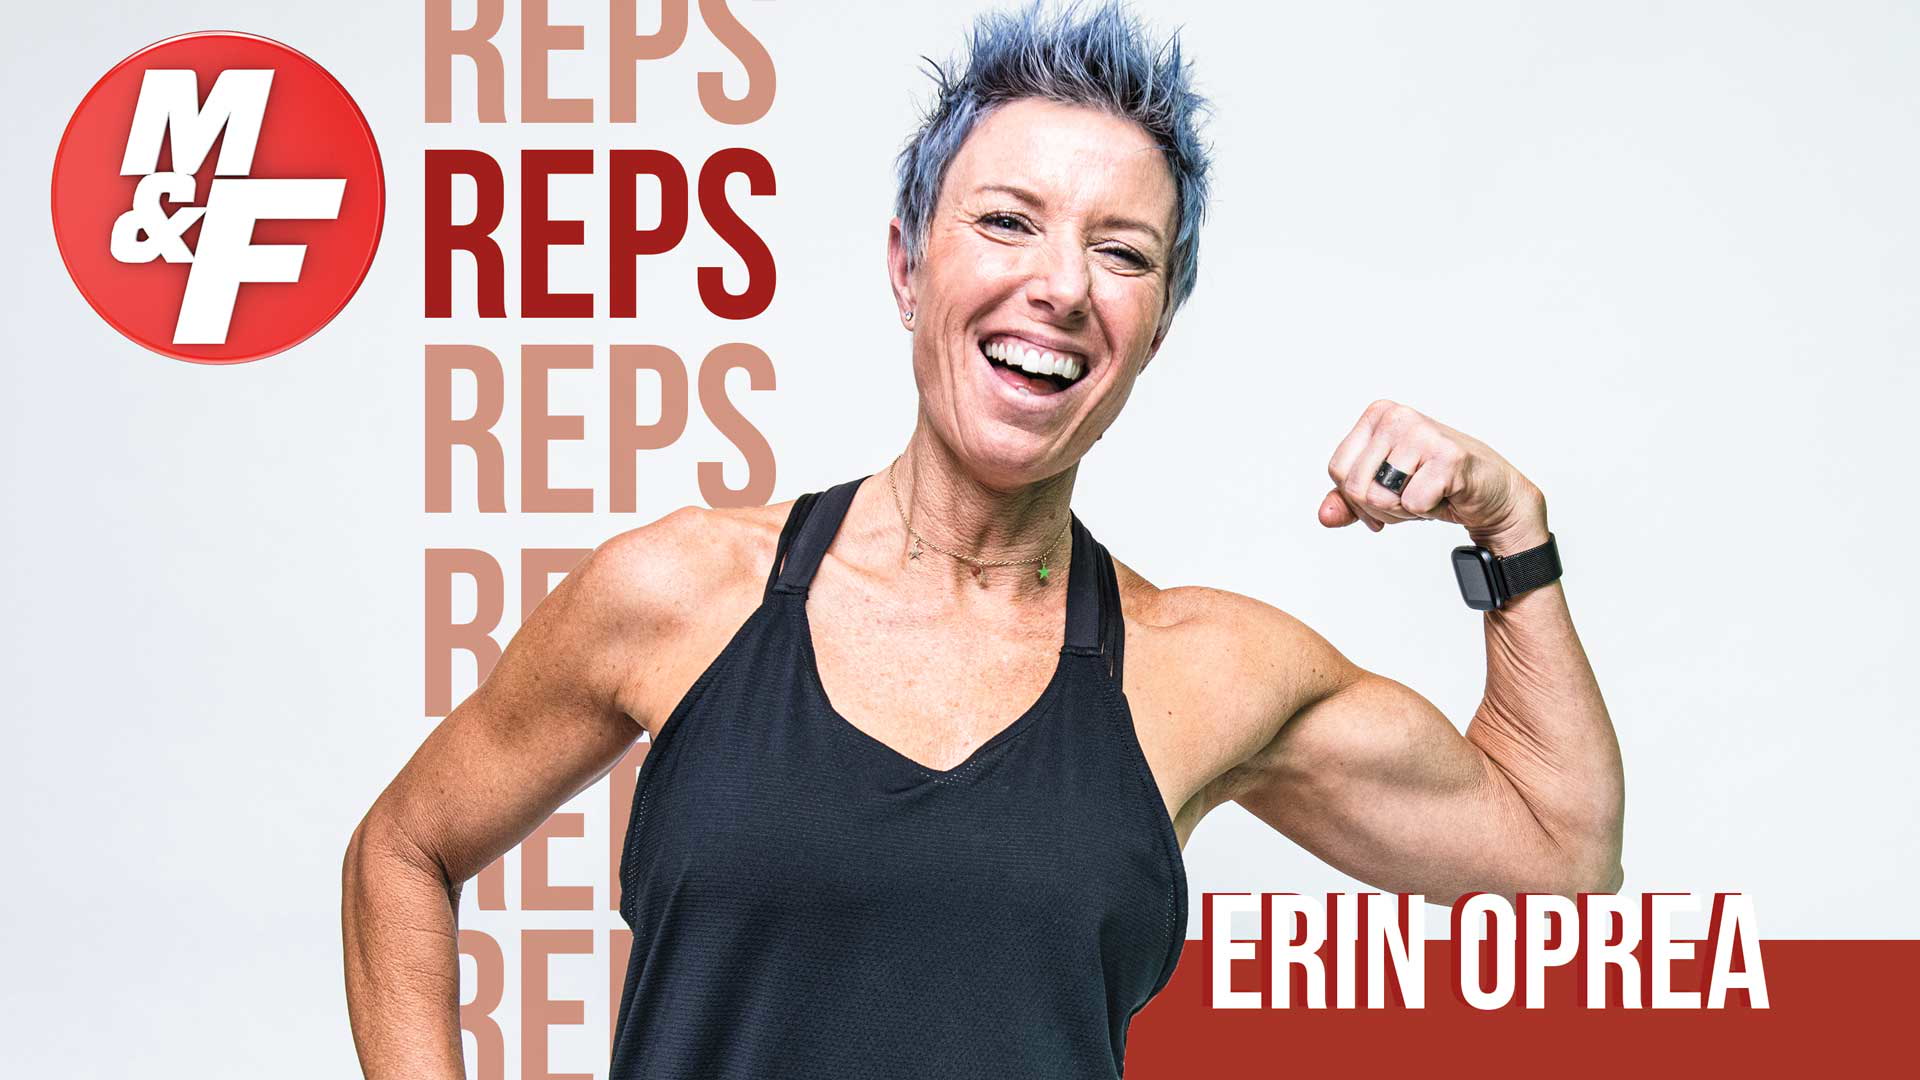 Trainer to the Country Stars Erin Oprea Gives 5 Simple Fitness Tips